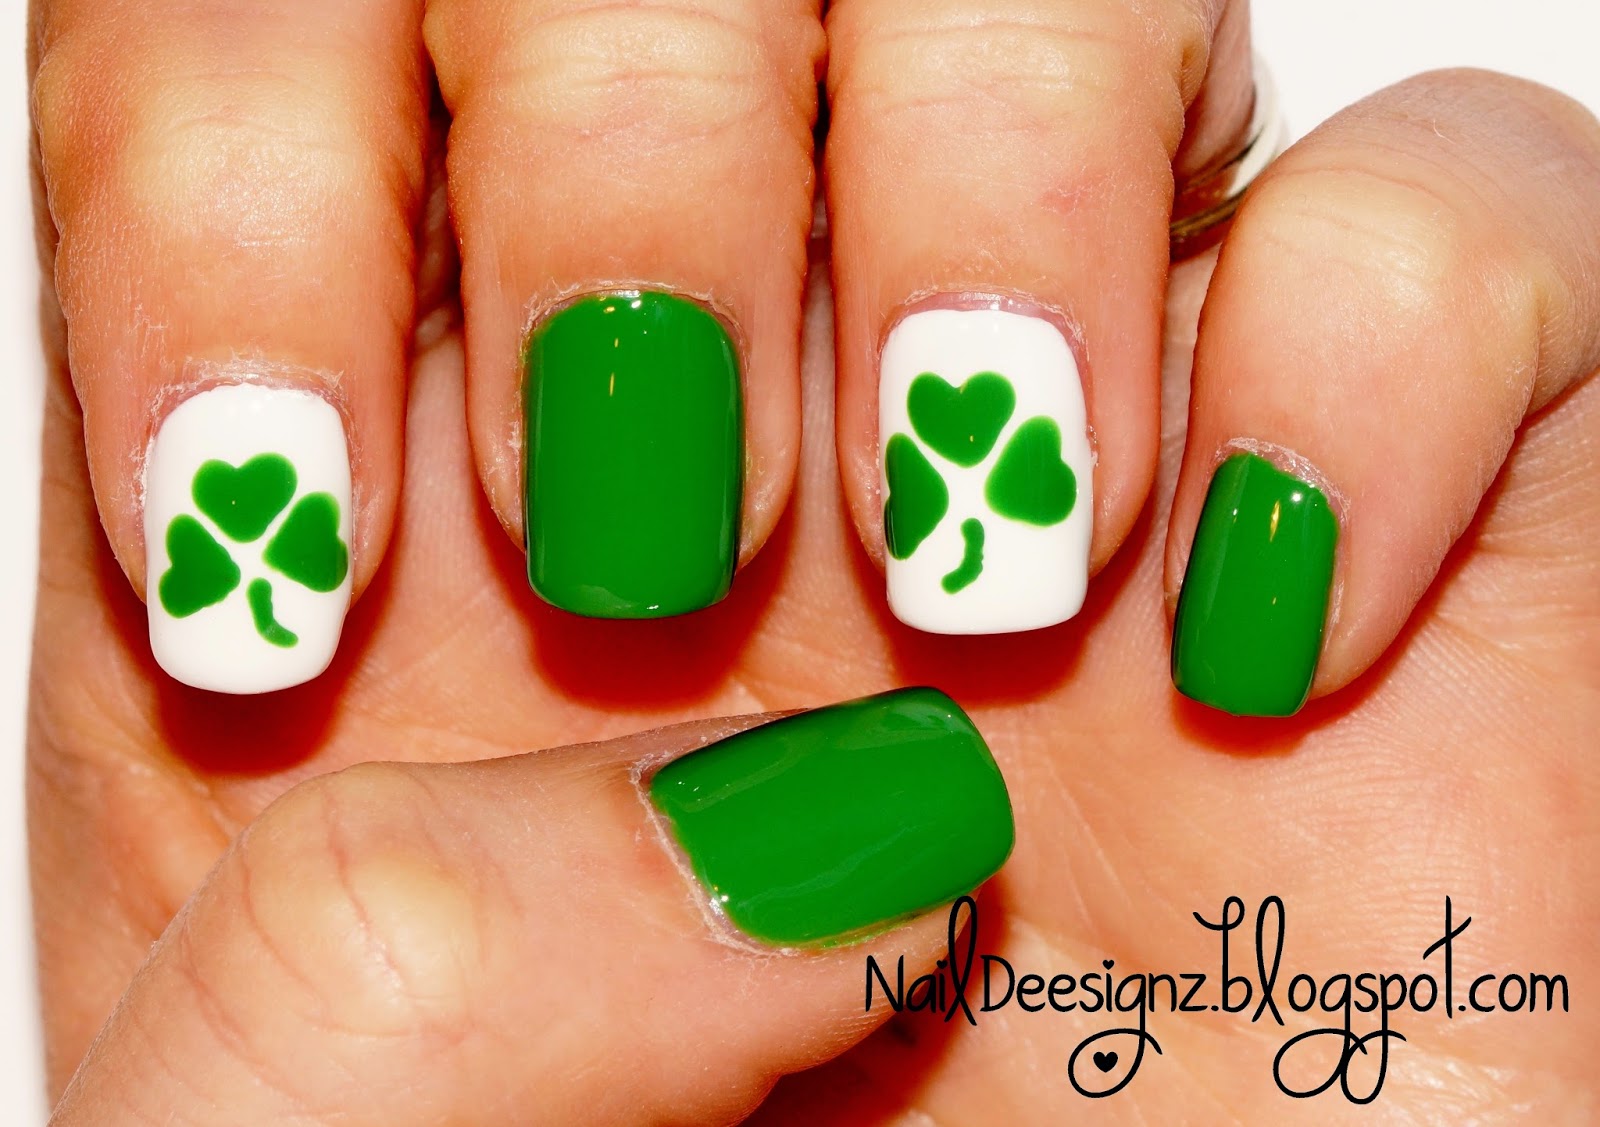 St. Patrick's Day Nail Art Ideas - wide 4